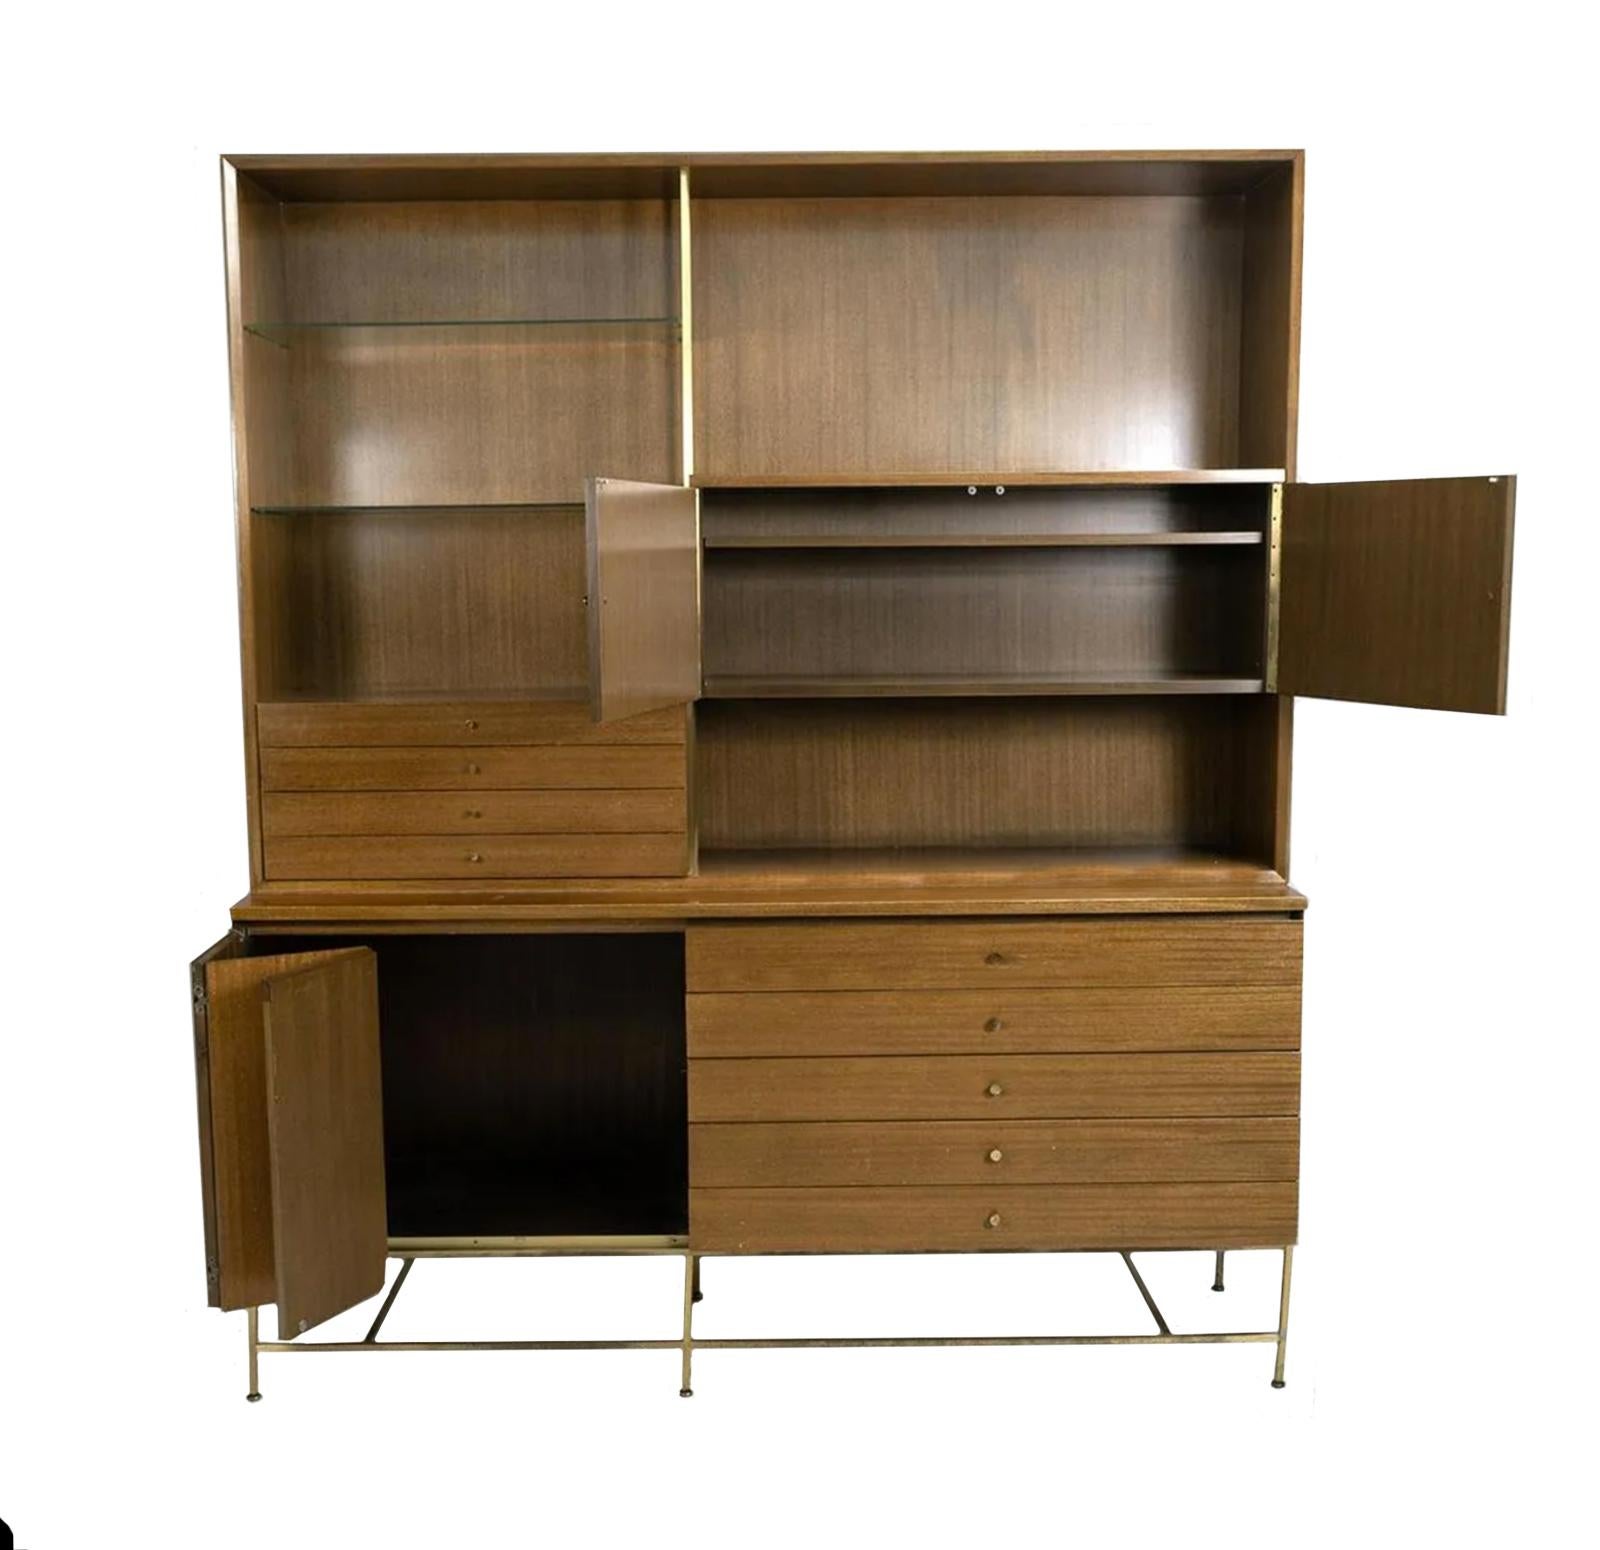 Stunning Mid century American designer Paul McCobb Wall unit with lower credenza in walnut. Original finish in good vintage condition with front folding walnut front doors and brass accents. All bleached Walnut brown finish with a brass accents.